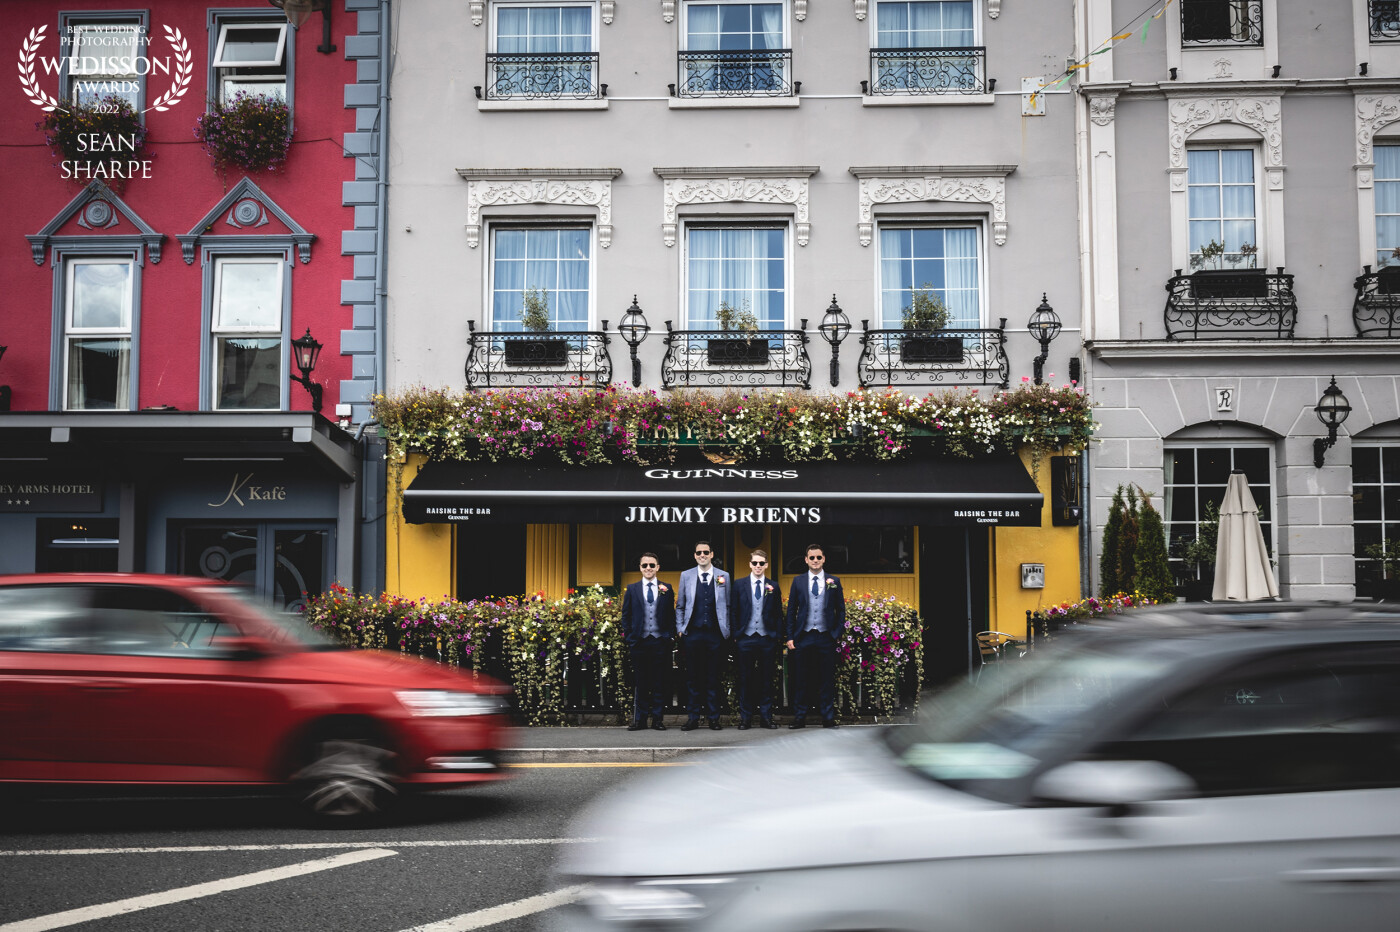 A traditional pint before the wedding with your groomsmen. This shot took a few attempts to get the cars to line up with the guys but always worth the effort.